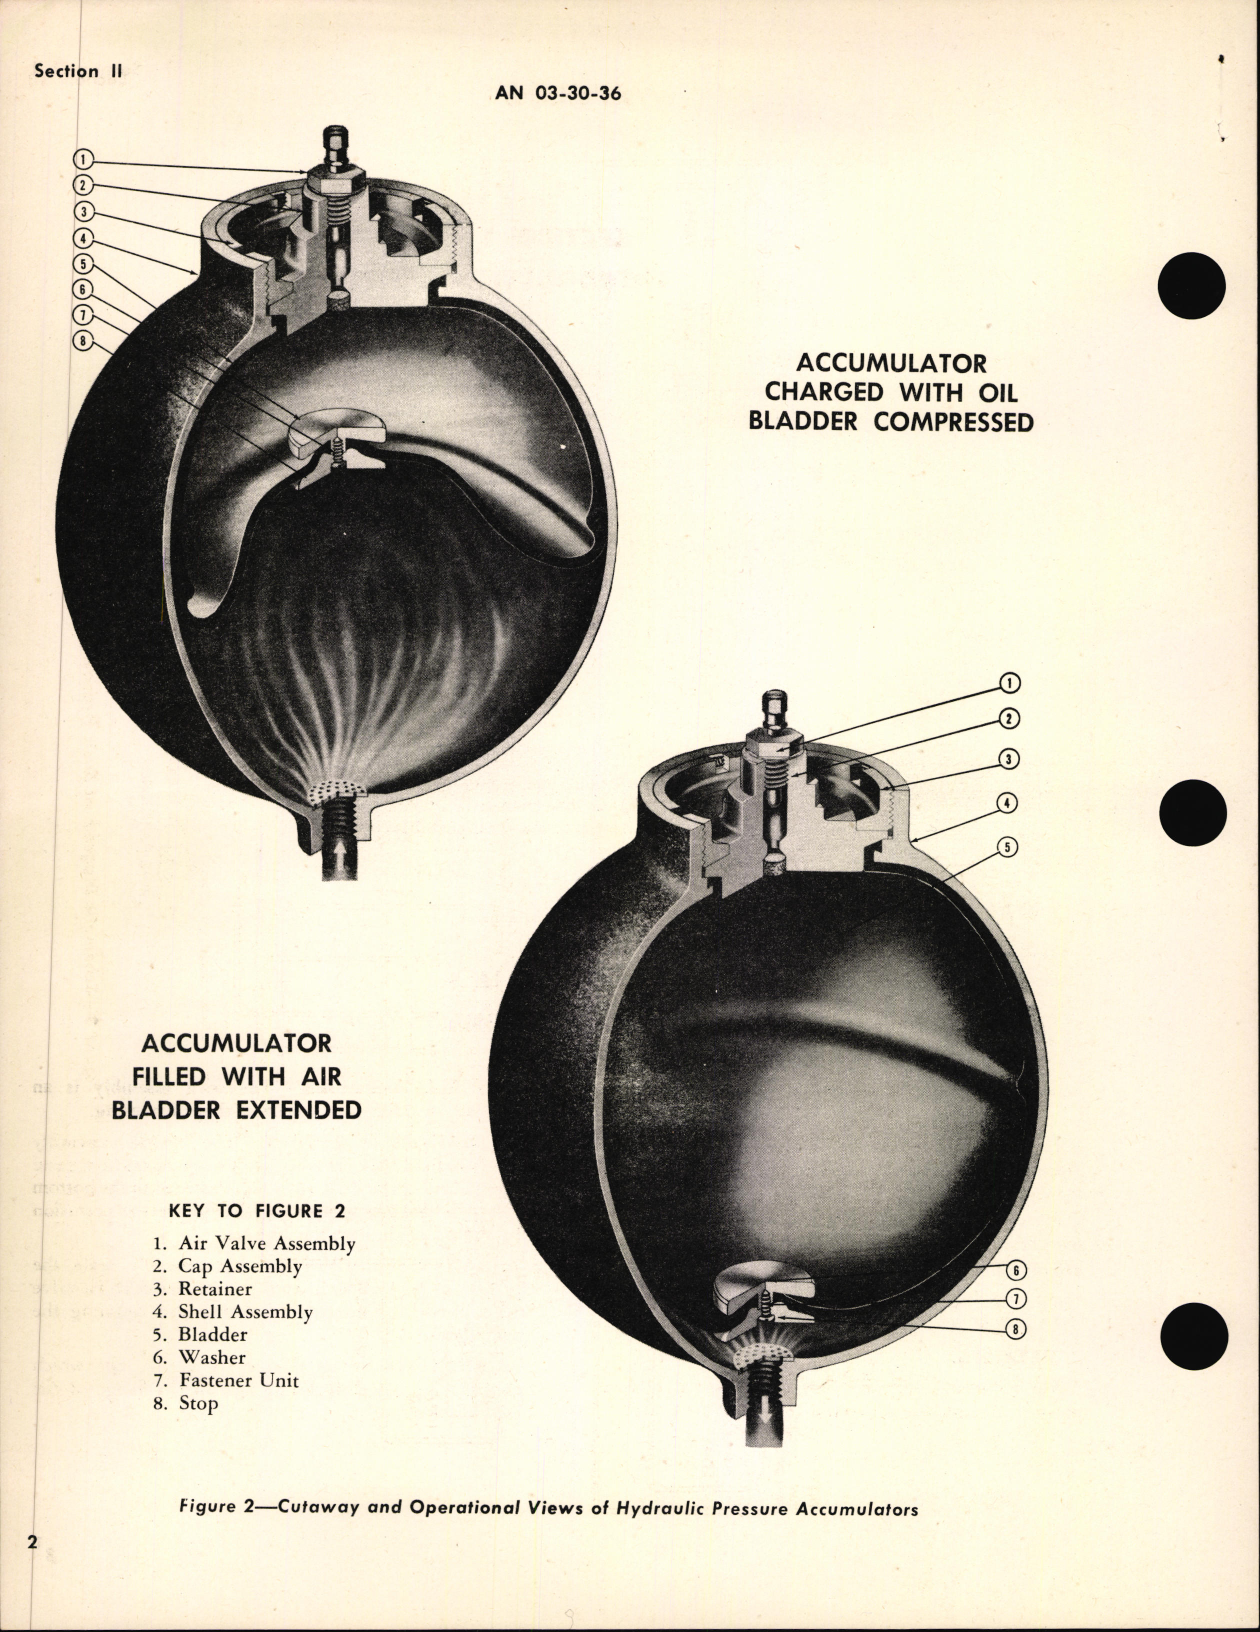 Sample page 6 from AirCorps Library document: Operation, Service, and Instructions with Parts Catalog Hydraulic Pressure Accumulators, 5, 7.5 & 10 Inch, 1500 PSI Maximum